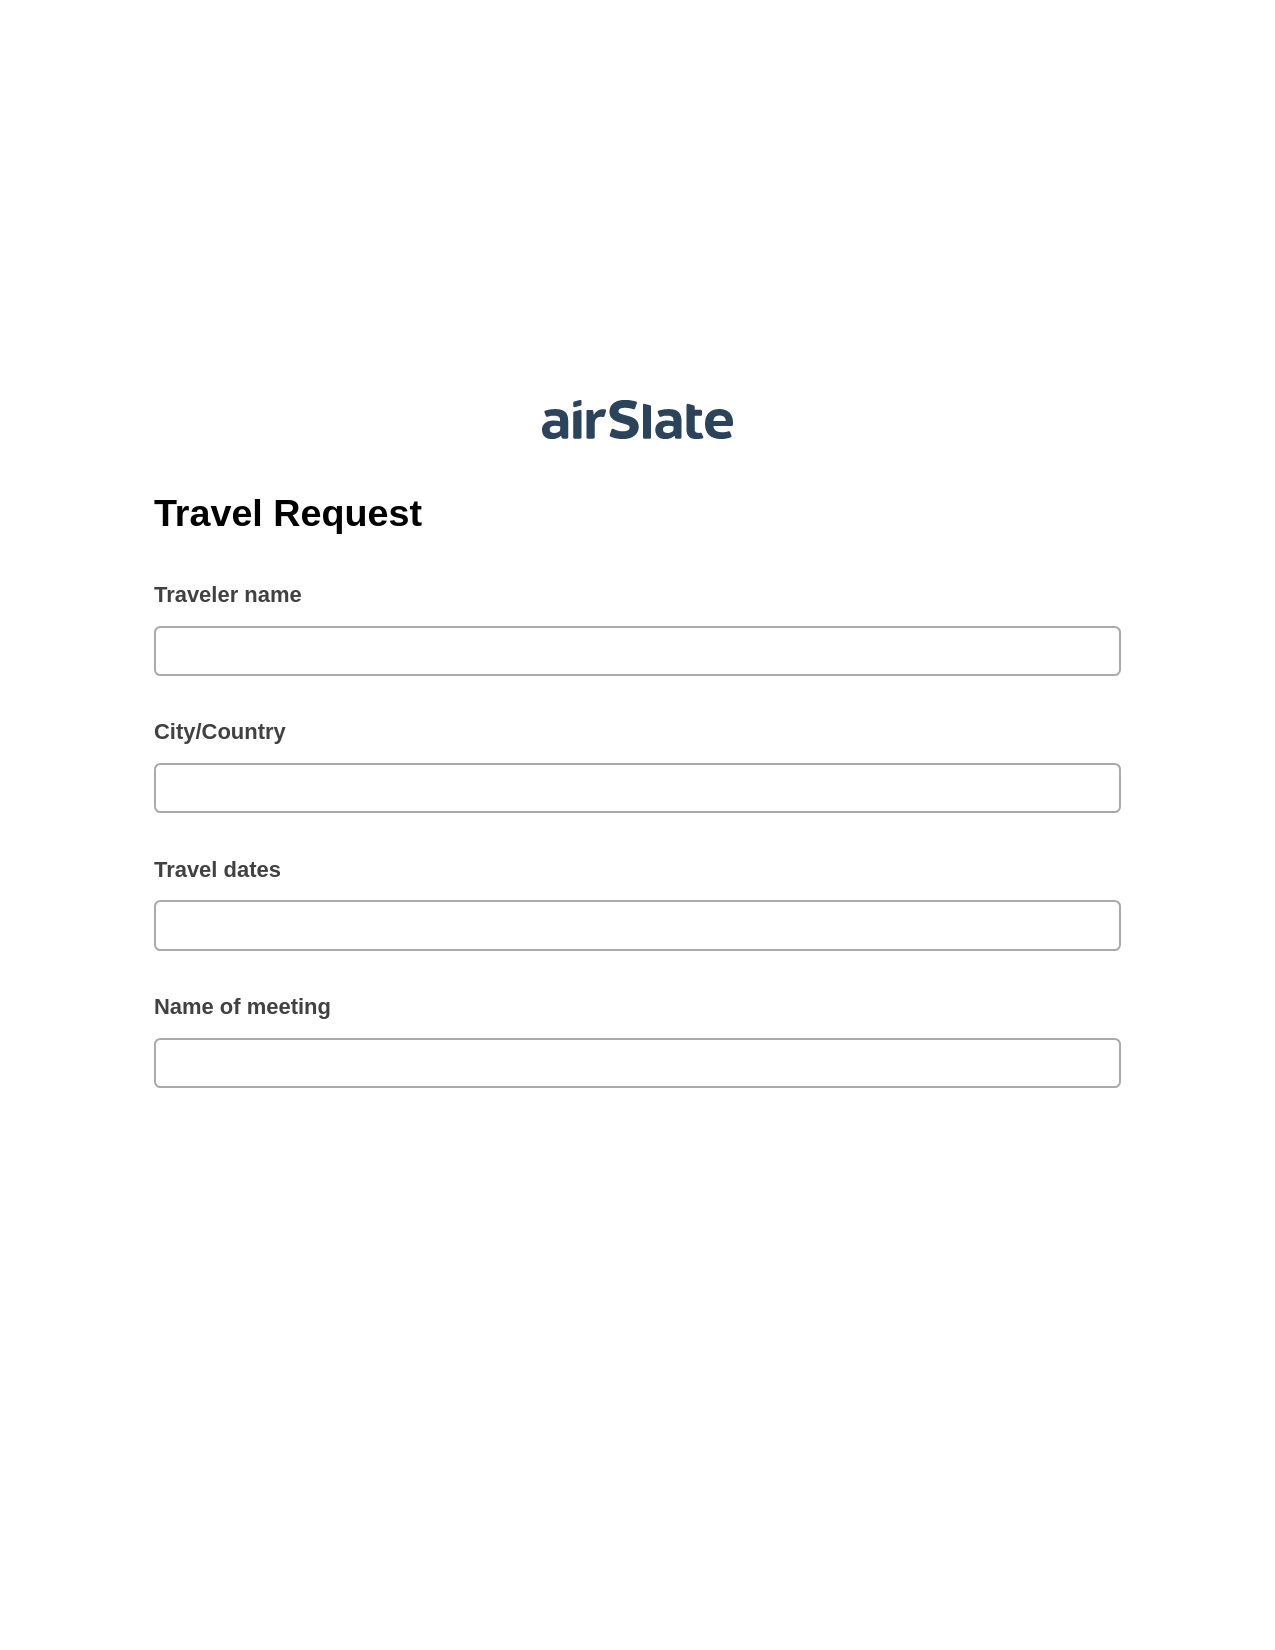 Travel Request Pre-fill Dropdowns from Excel Bot, Update Salesforce Record Bot, Export to NetSuite Record Bot